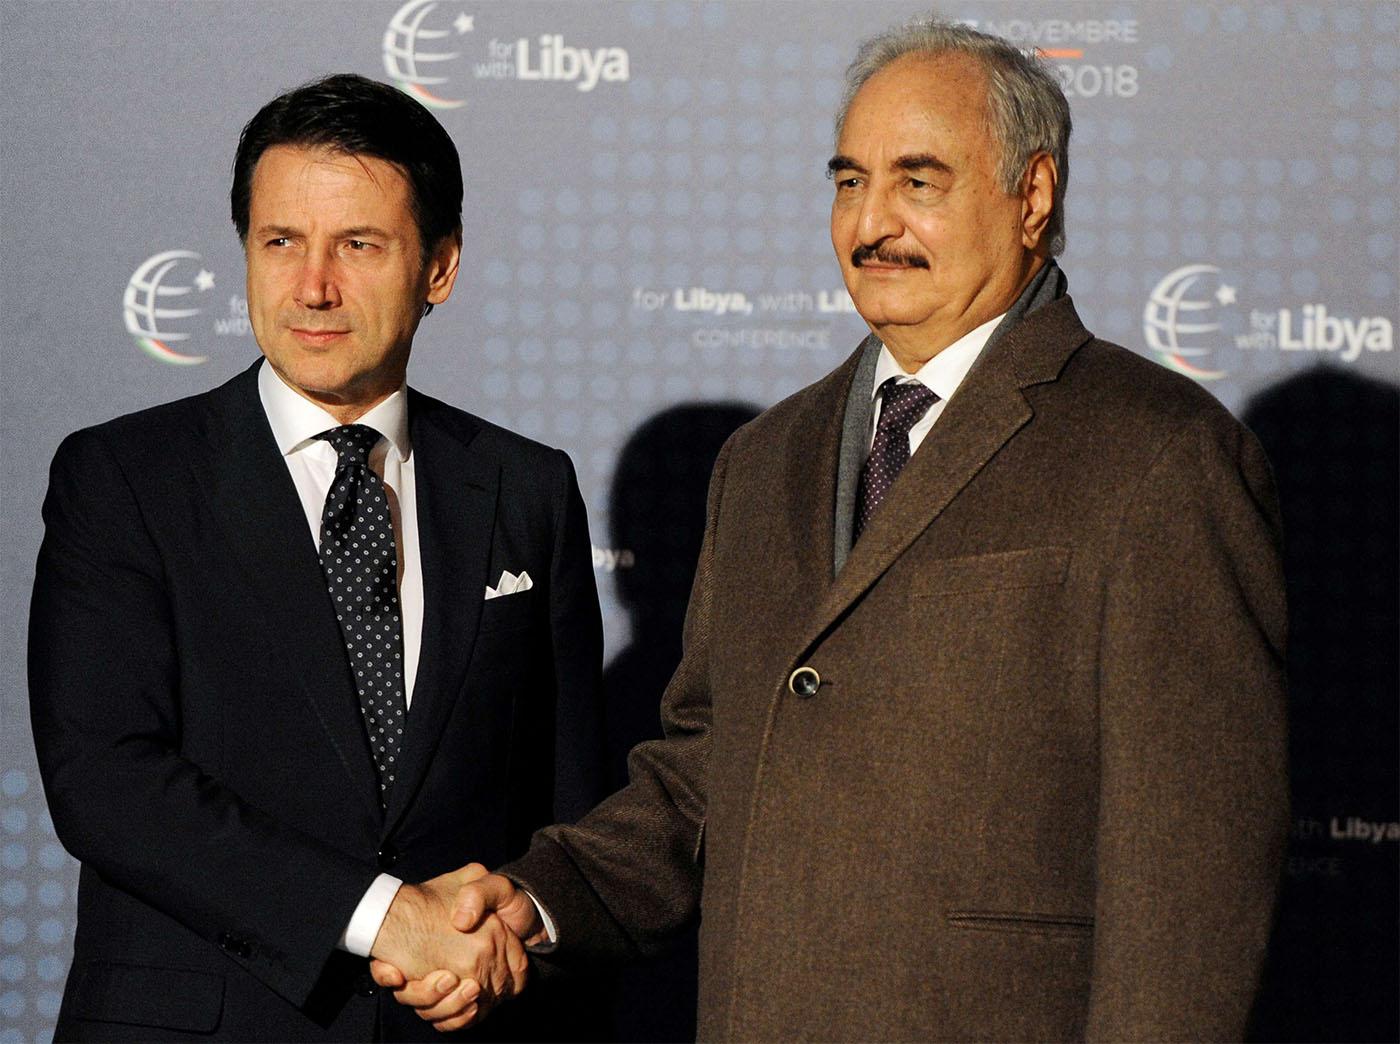 Italy's Prime Minister Giuseppe Conte welcomes Libyan military commander Khalifa Haftar 